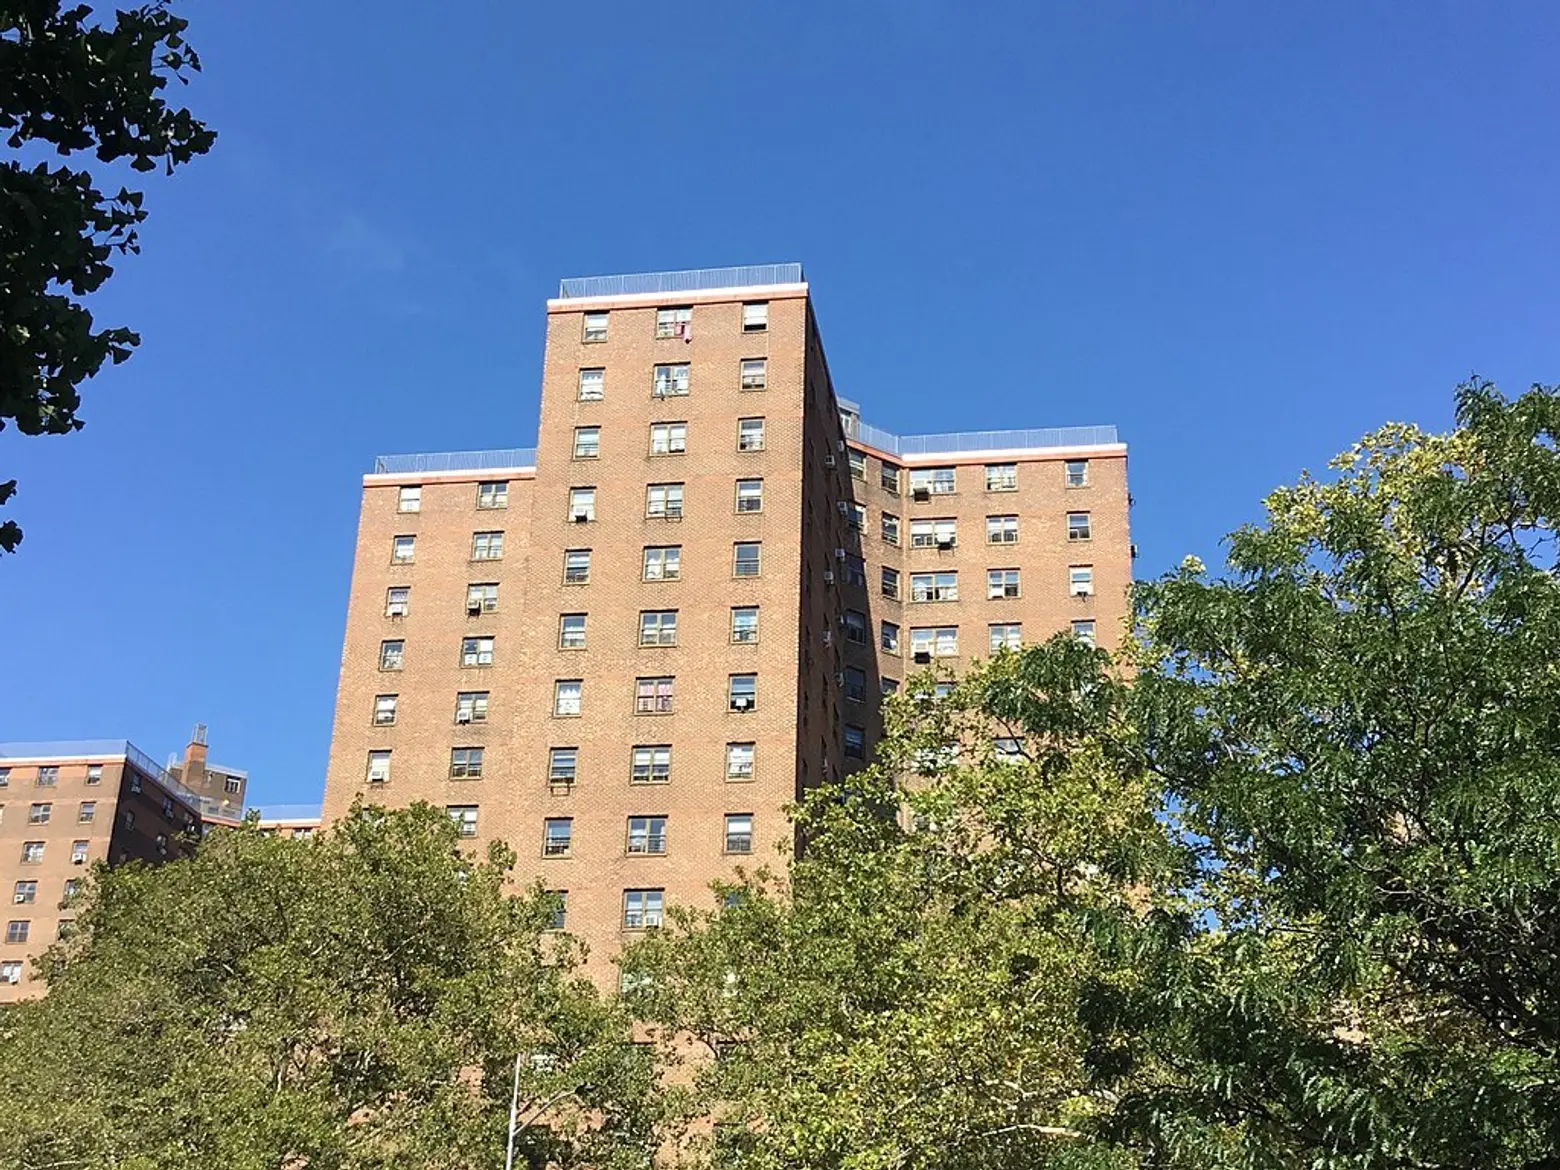 70 NYCHA workers charged with bribery and extortion